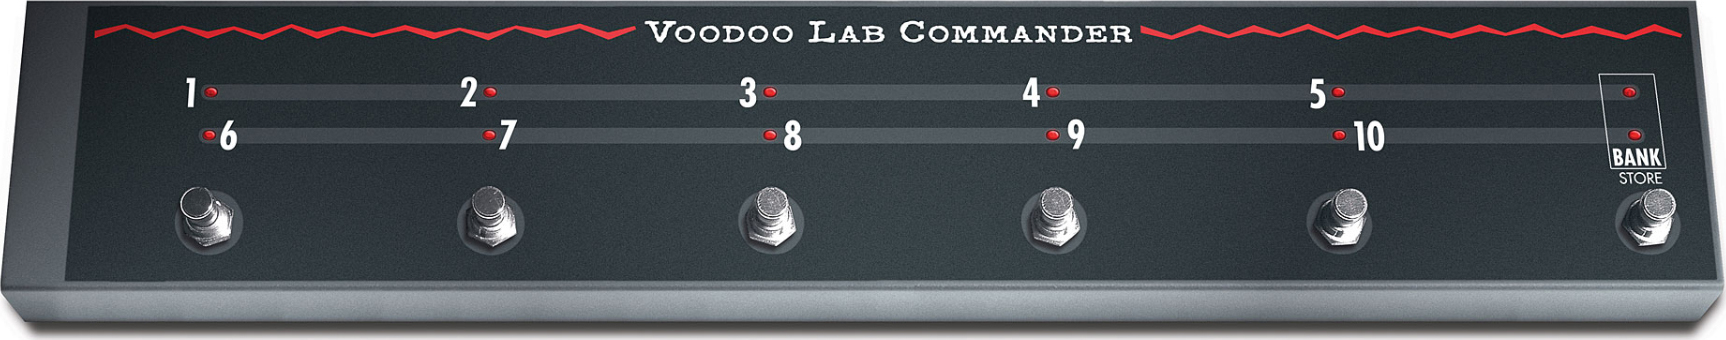 Voodoo Lab Commander Effects & Amp Switching System - Switch pedal - Main picture